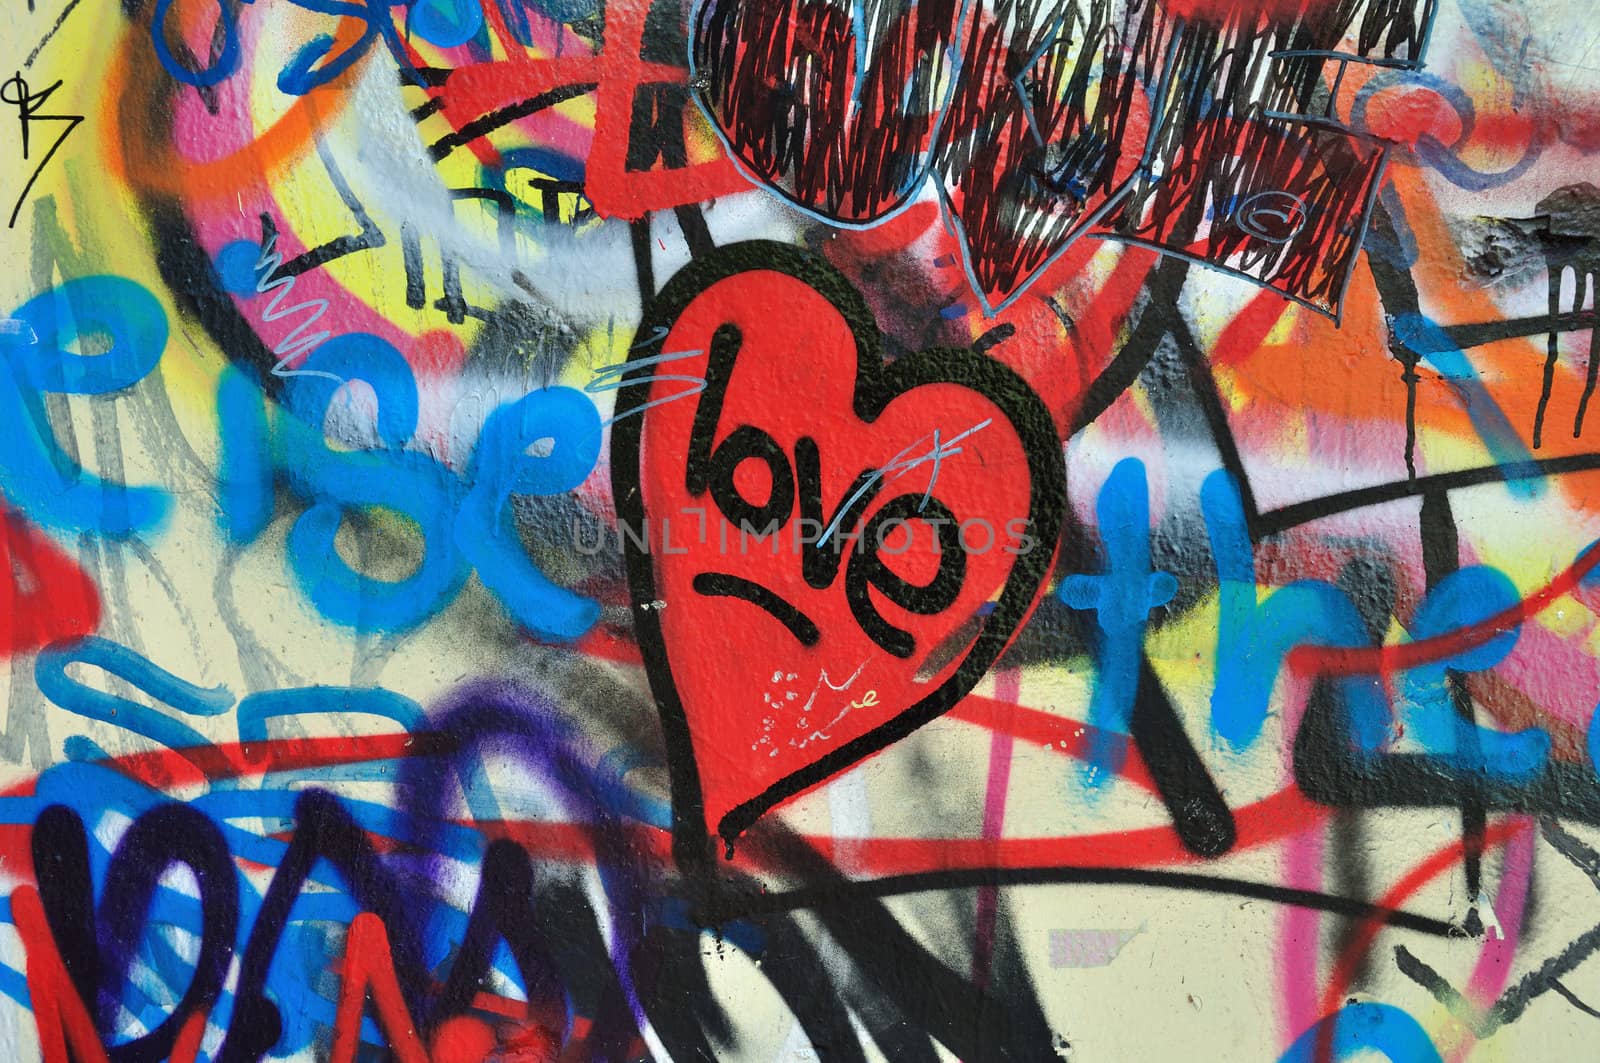 Painted heart on messy smudged wall background. Love graffiti detail.